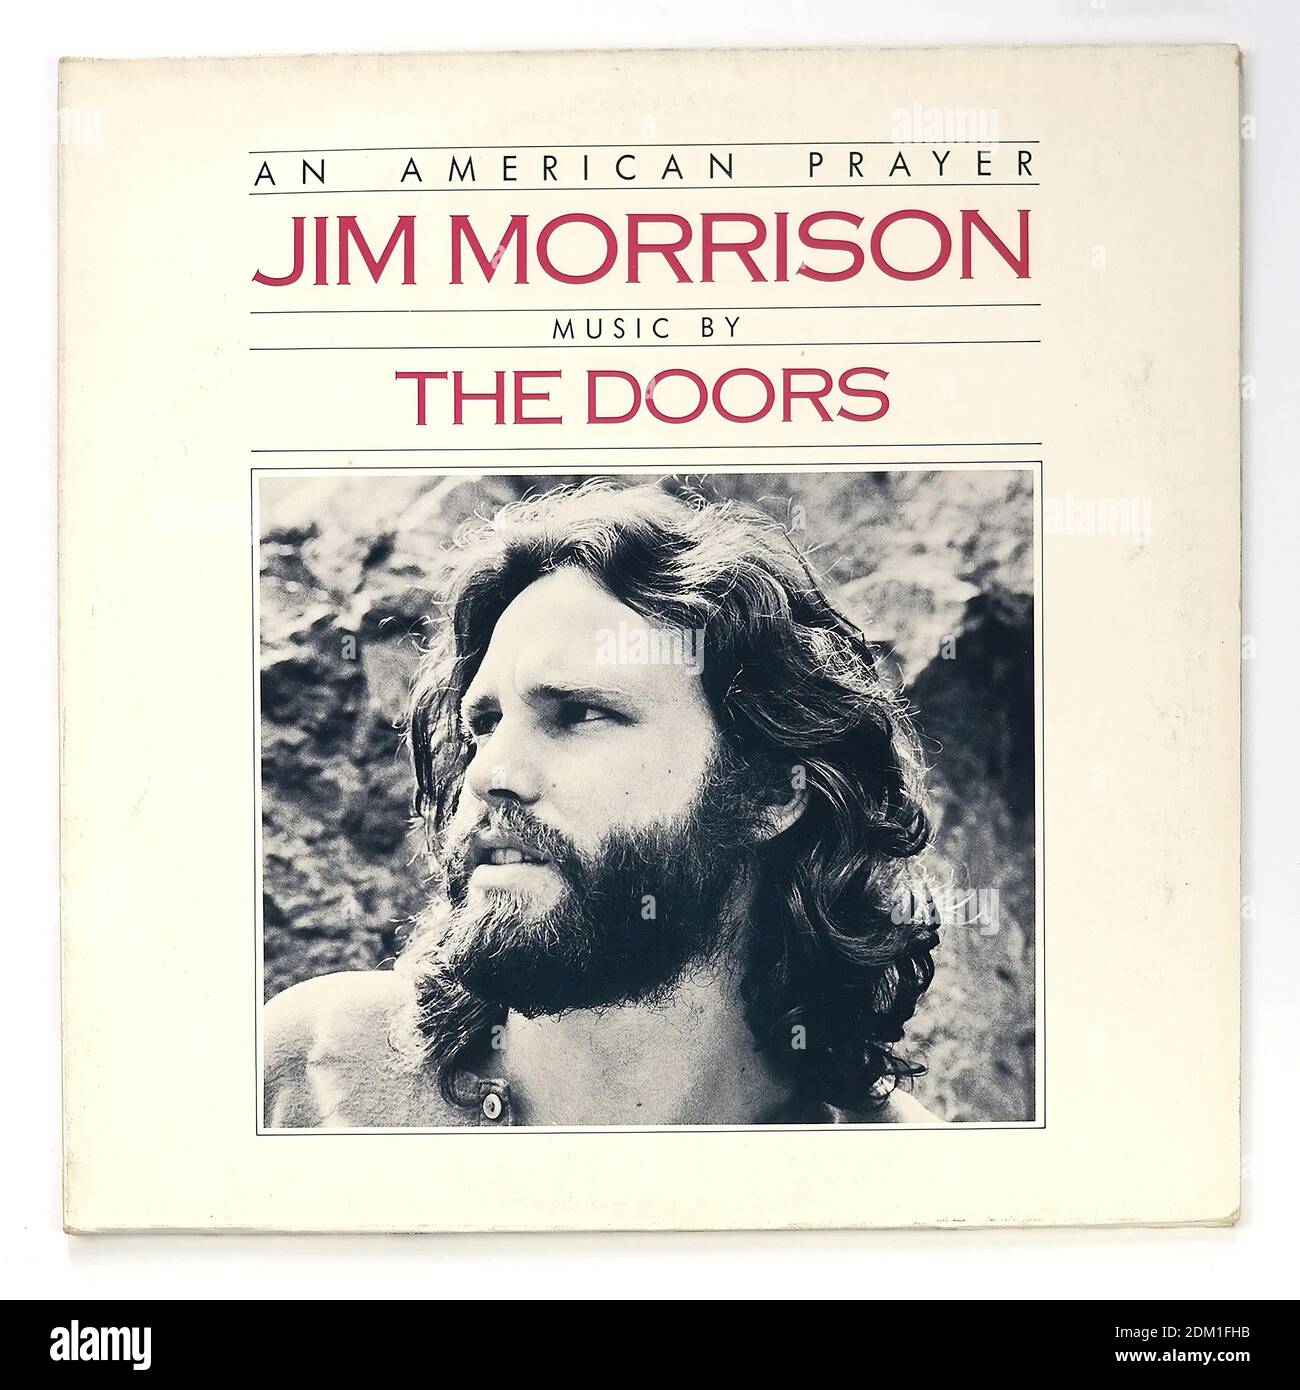 Jim Morrison Music By The Doors – An American Prayer  - Vintage Vinyl Record Cover02 Stock Photo